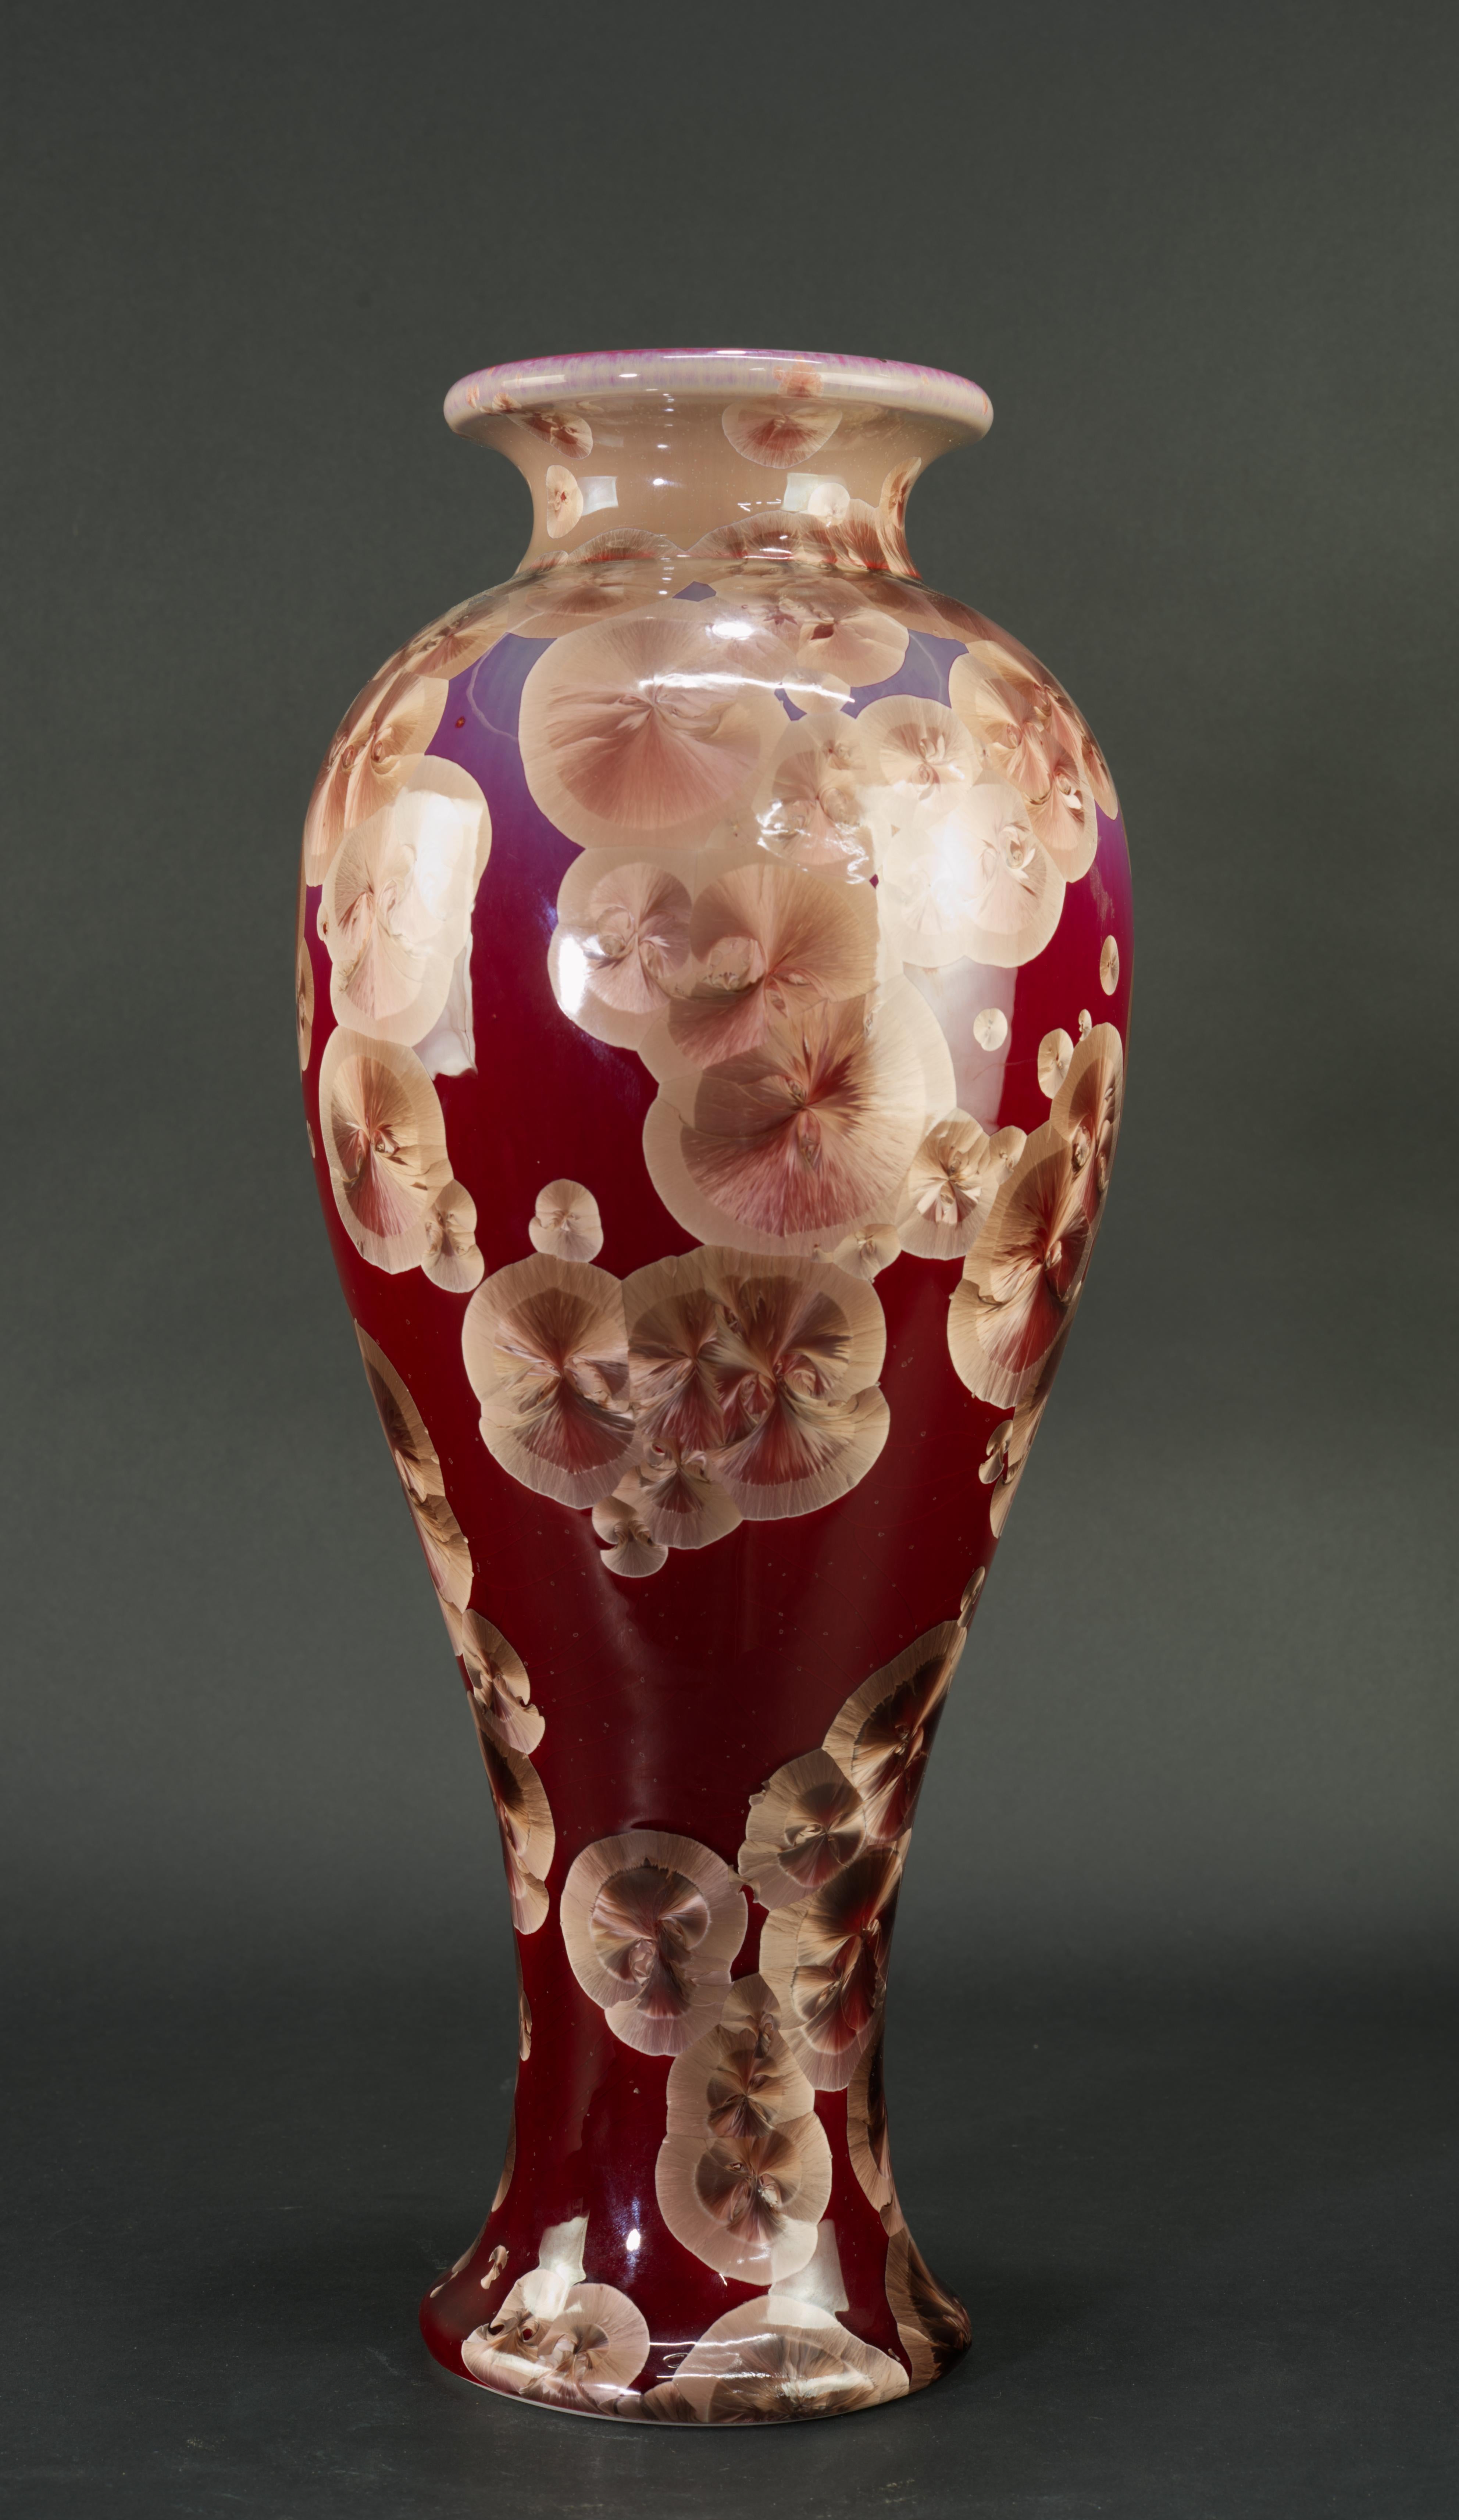 Crystalline Glaze Ceramic Vase, Red and Beige, American Art Studio Pottery In Good Condition For Sale In Clifton Springs, NY